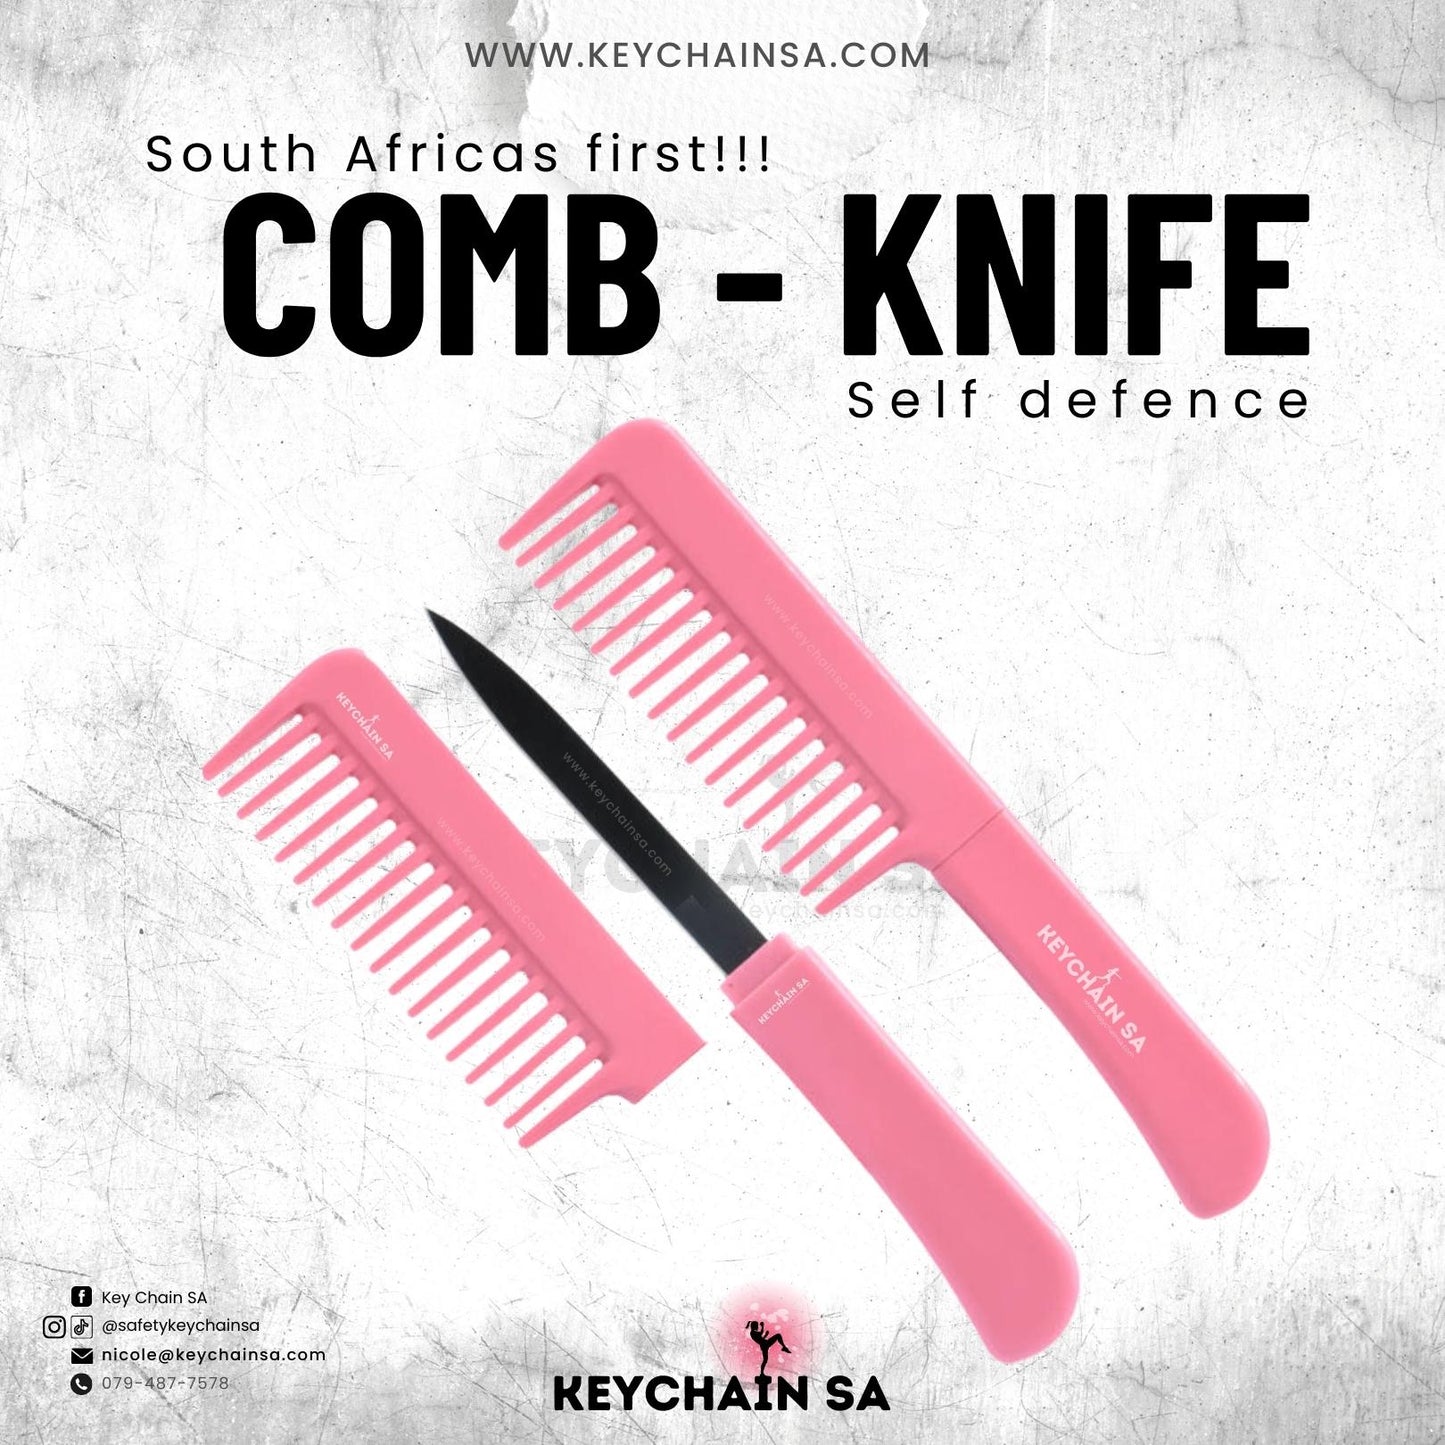 Comb Knife self defence - South Africa's 1st